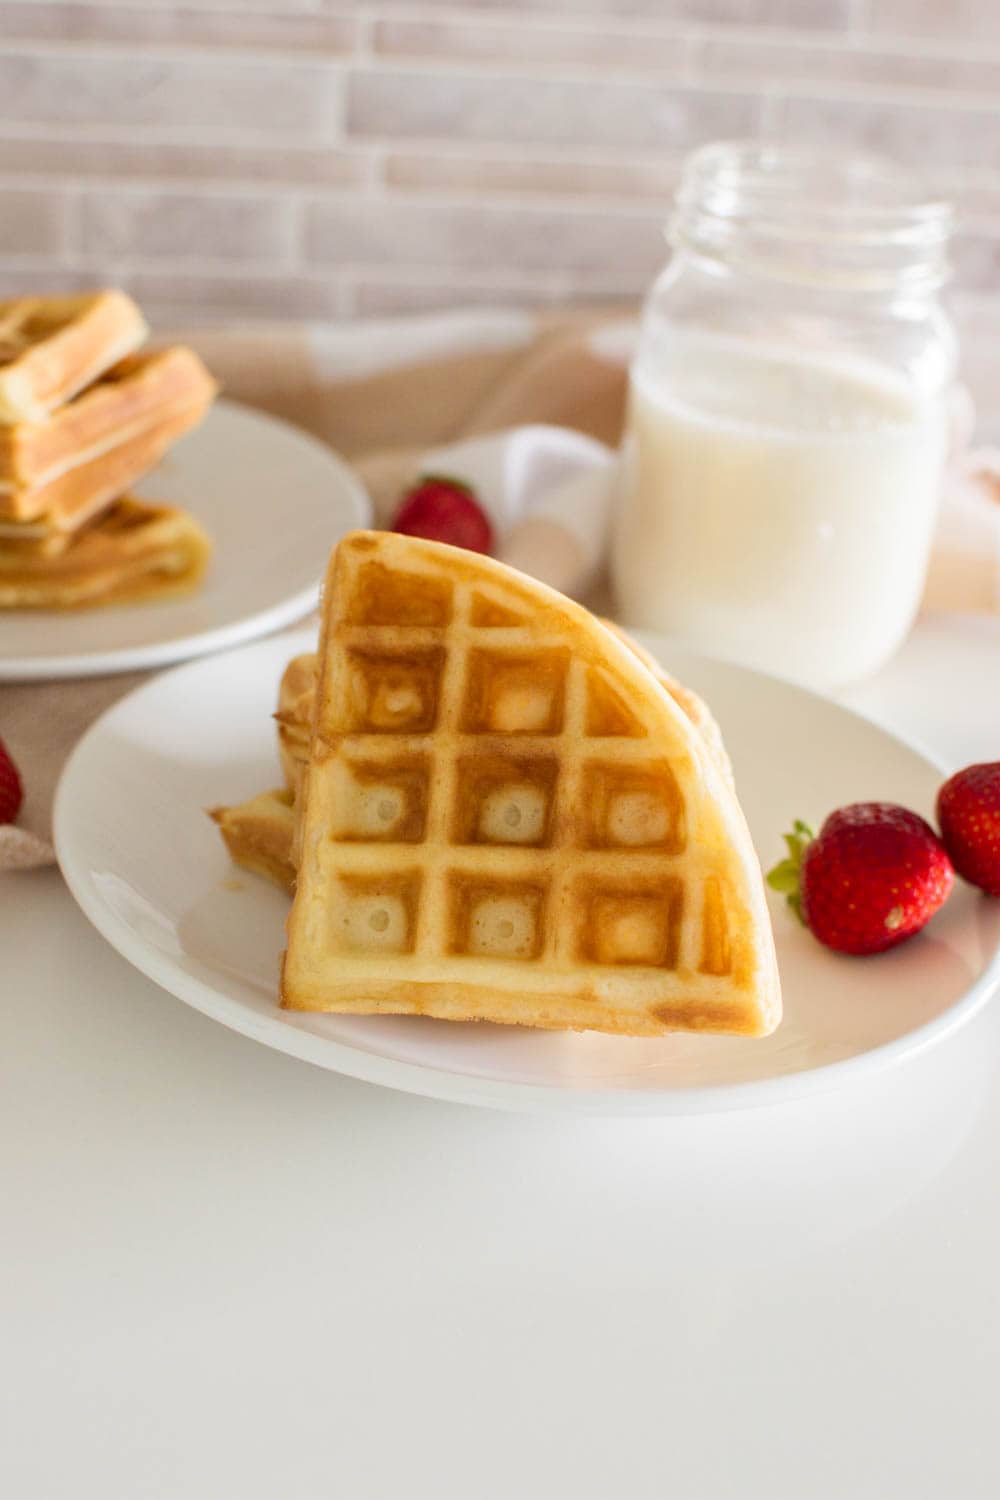 A quarter of an easy homemade waffle on a white plate